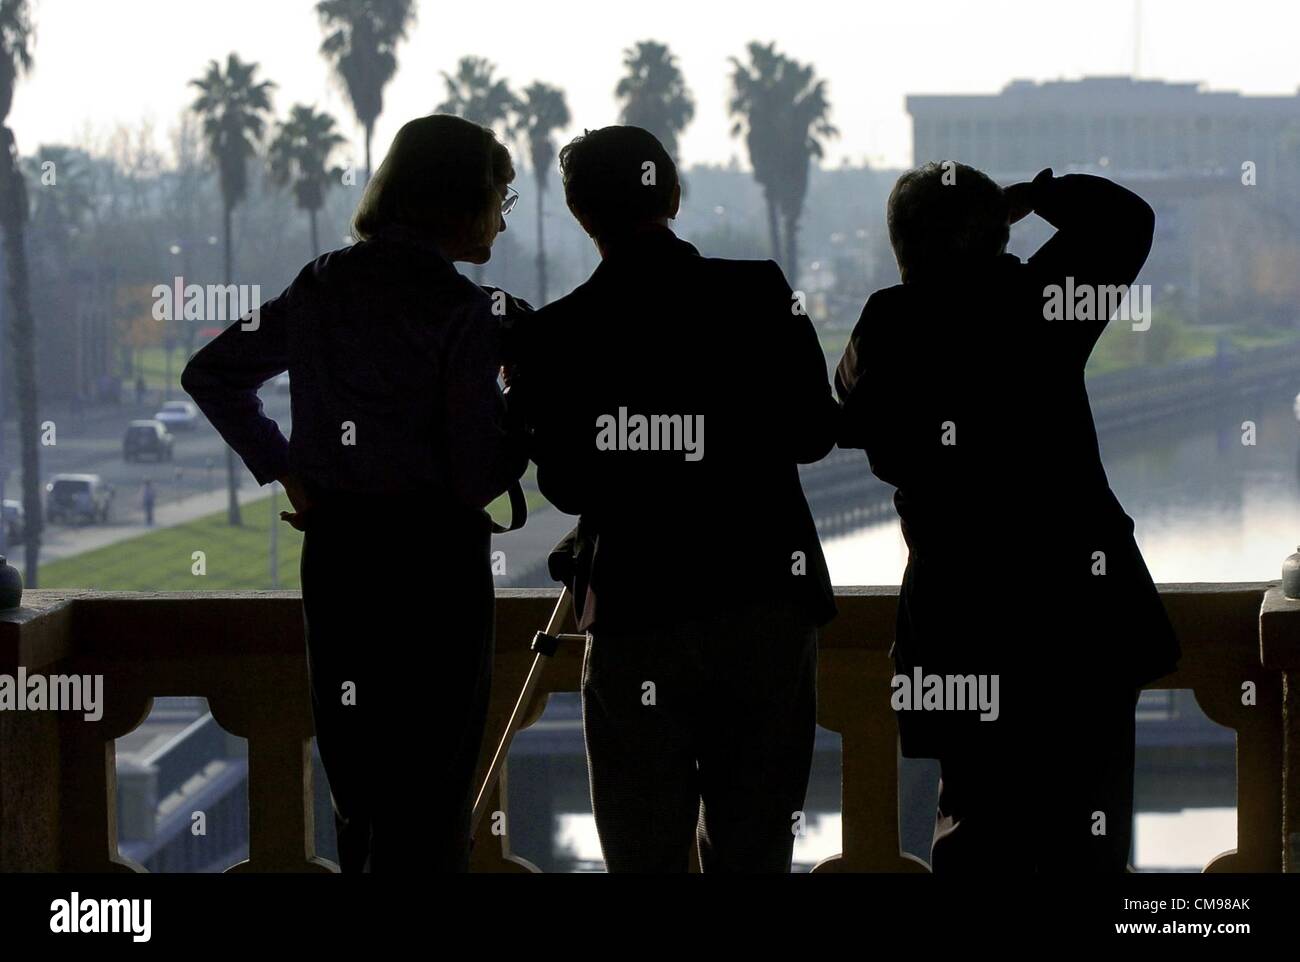 SECONDARY-- Local civic leaders admire the view looking west along the river from the terrace of the old Stockton Hotel in downtown Stockton on Wednesday December 15, 2004. The hotel is being refurbished to be low-income housing for seniors.  2321  Sacramento Bee/  Randall Benton/ZUMA Press Stock Photo